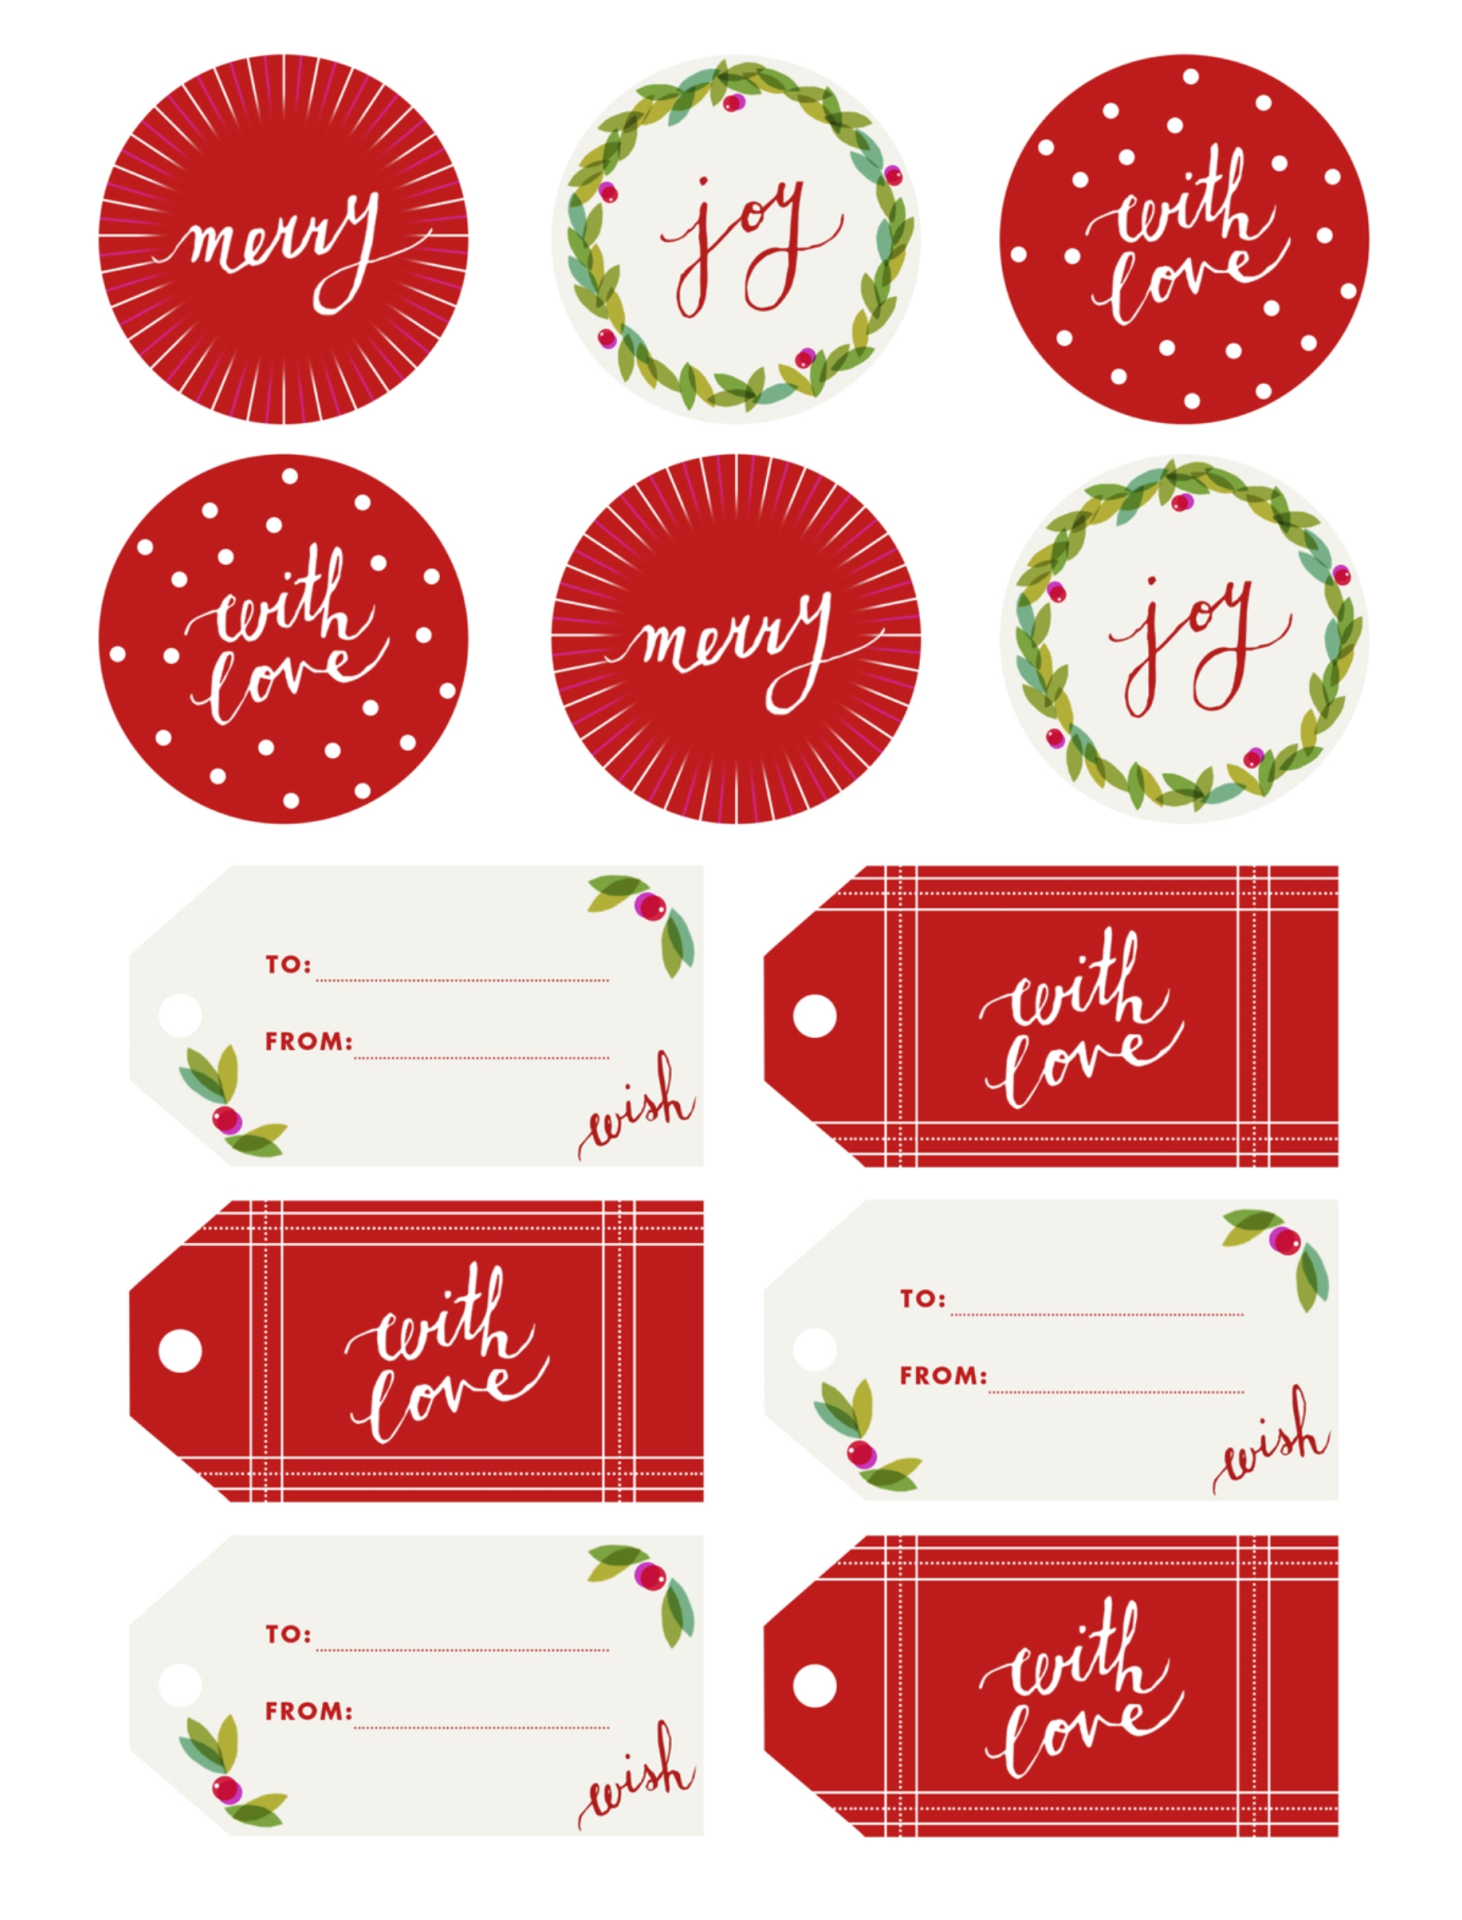 7-best-images-of-free-editable-printable-gift-tags-free-editable